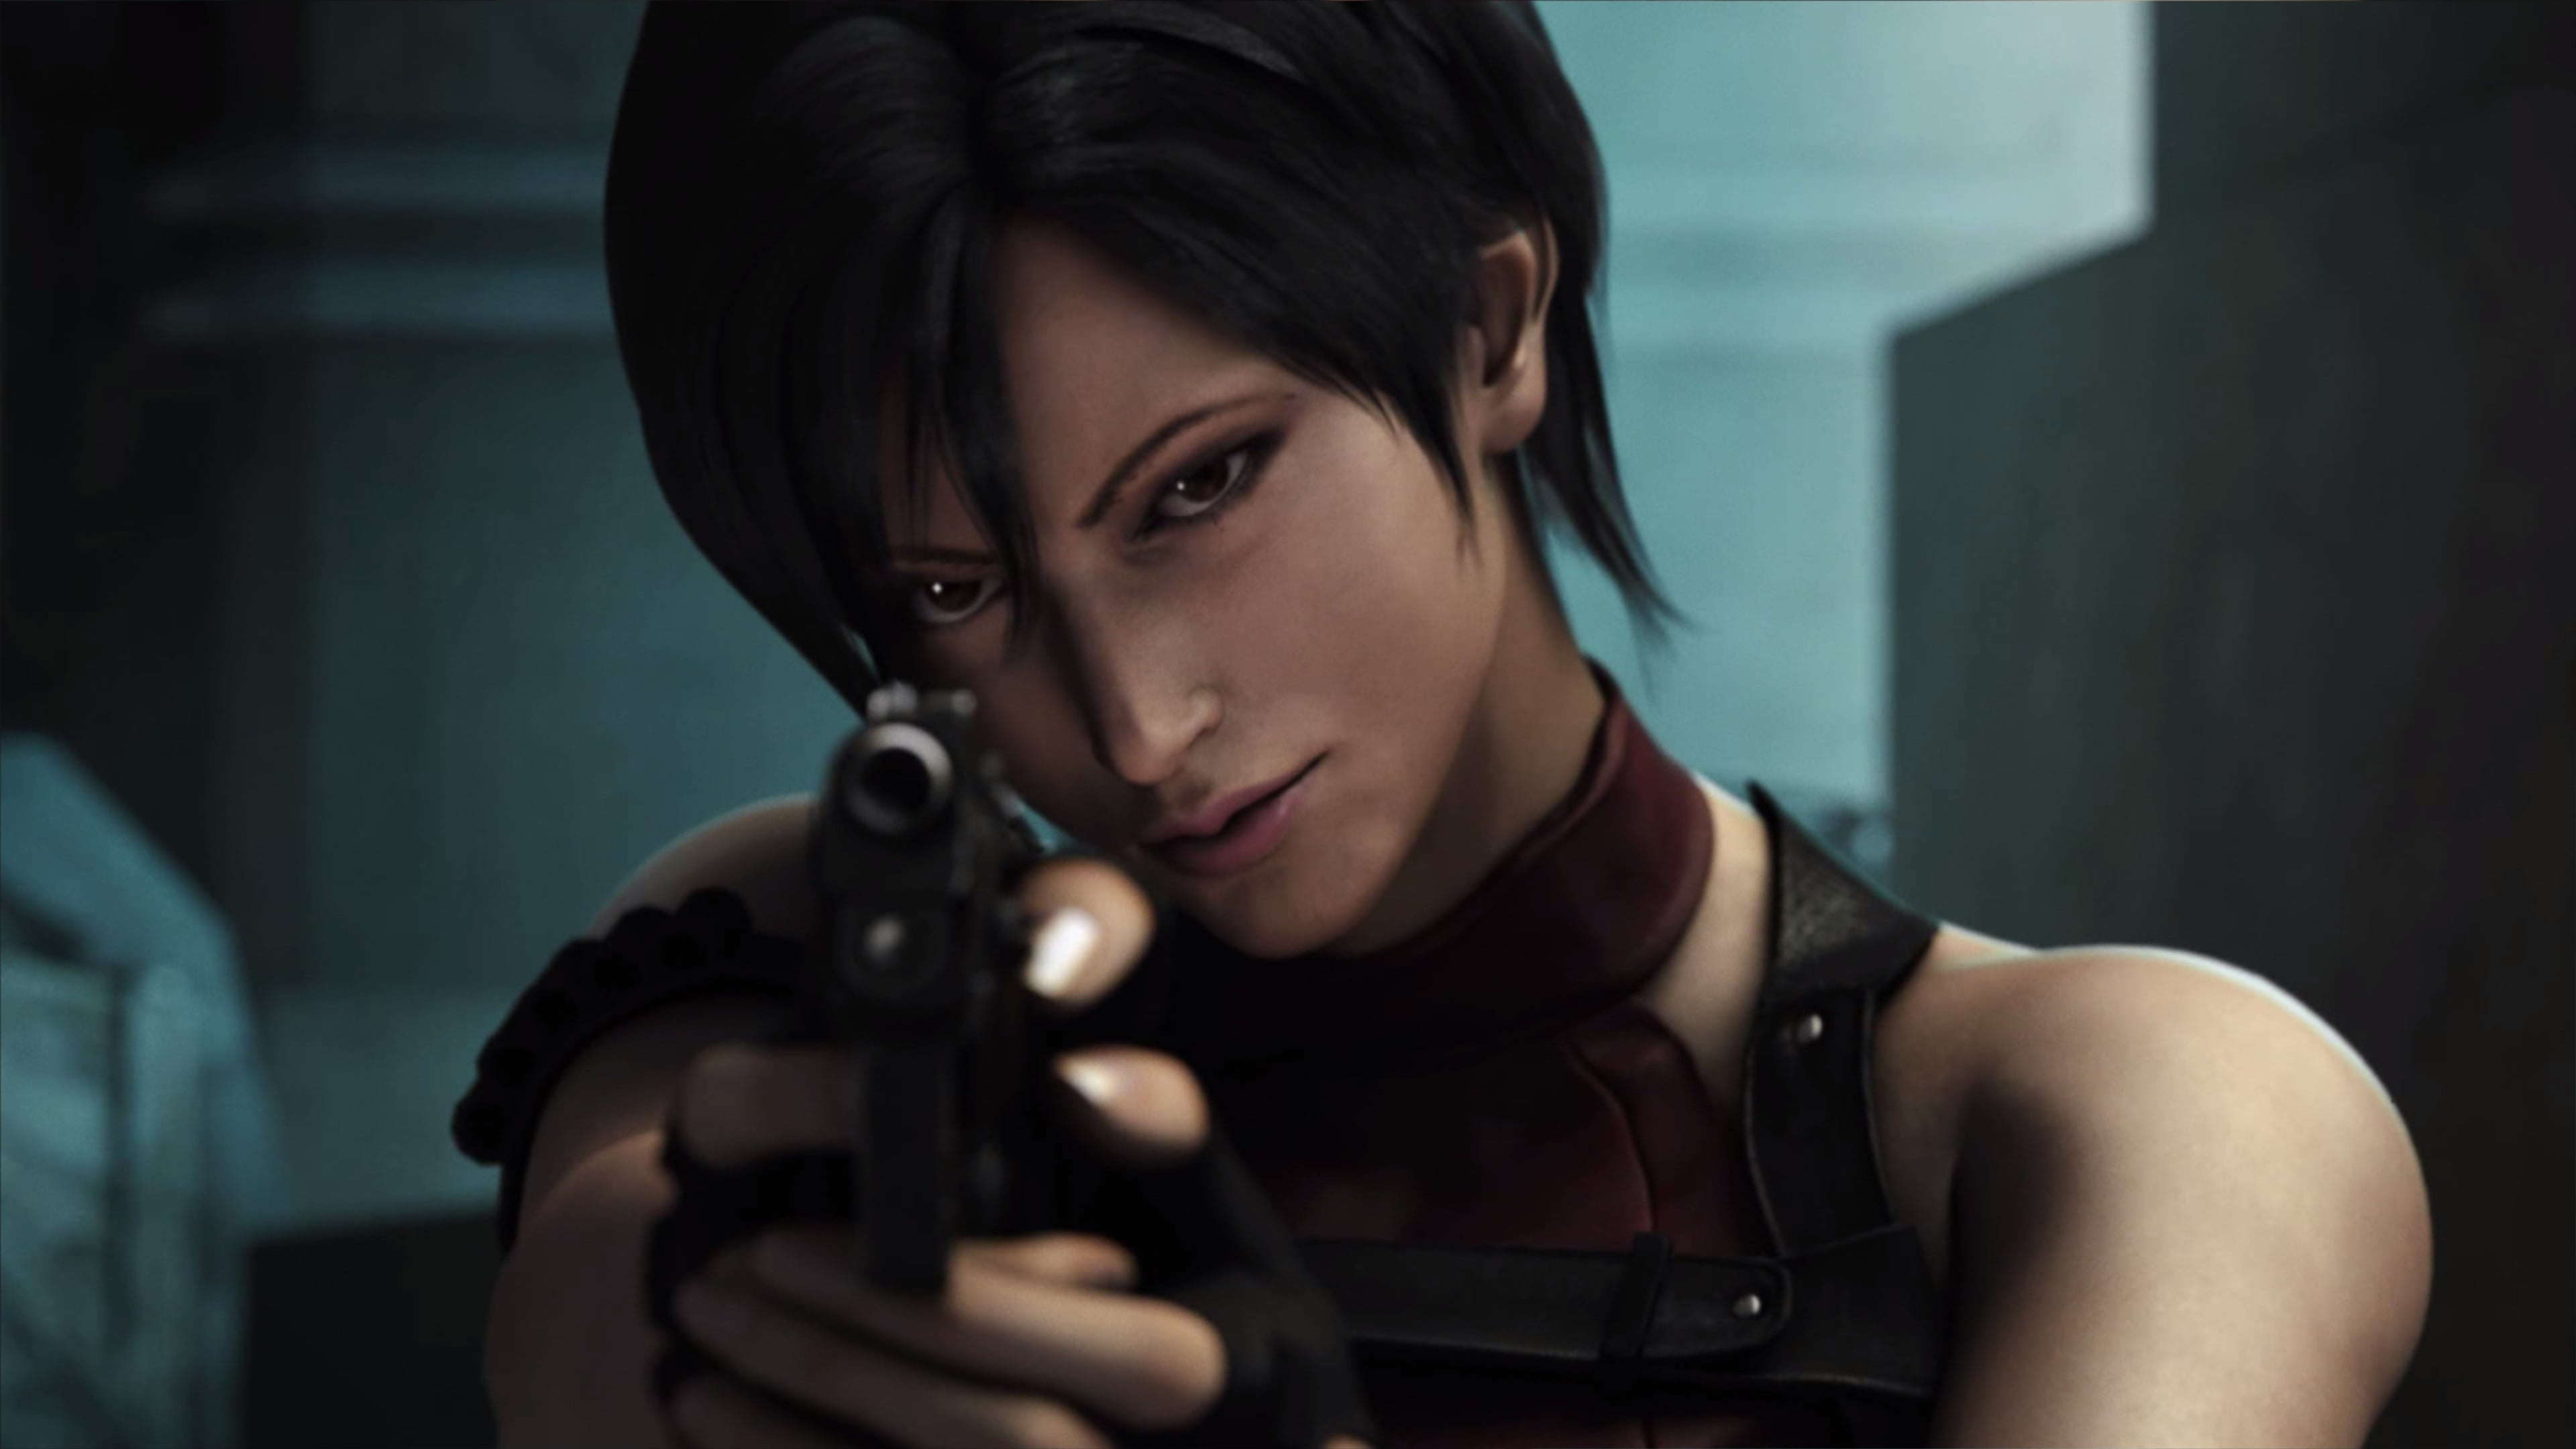 ada wong, Resident Evil, Resident Evil 4, Girl With Weapon